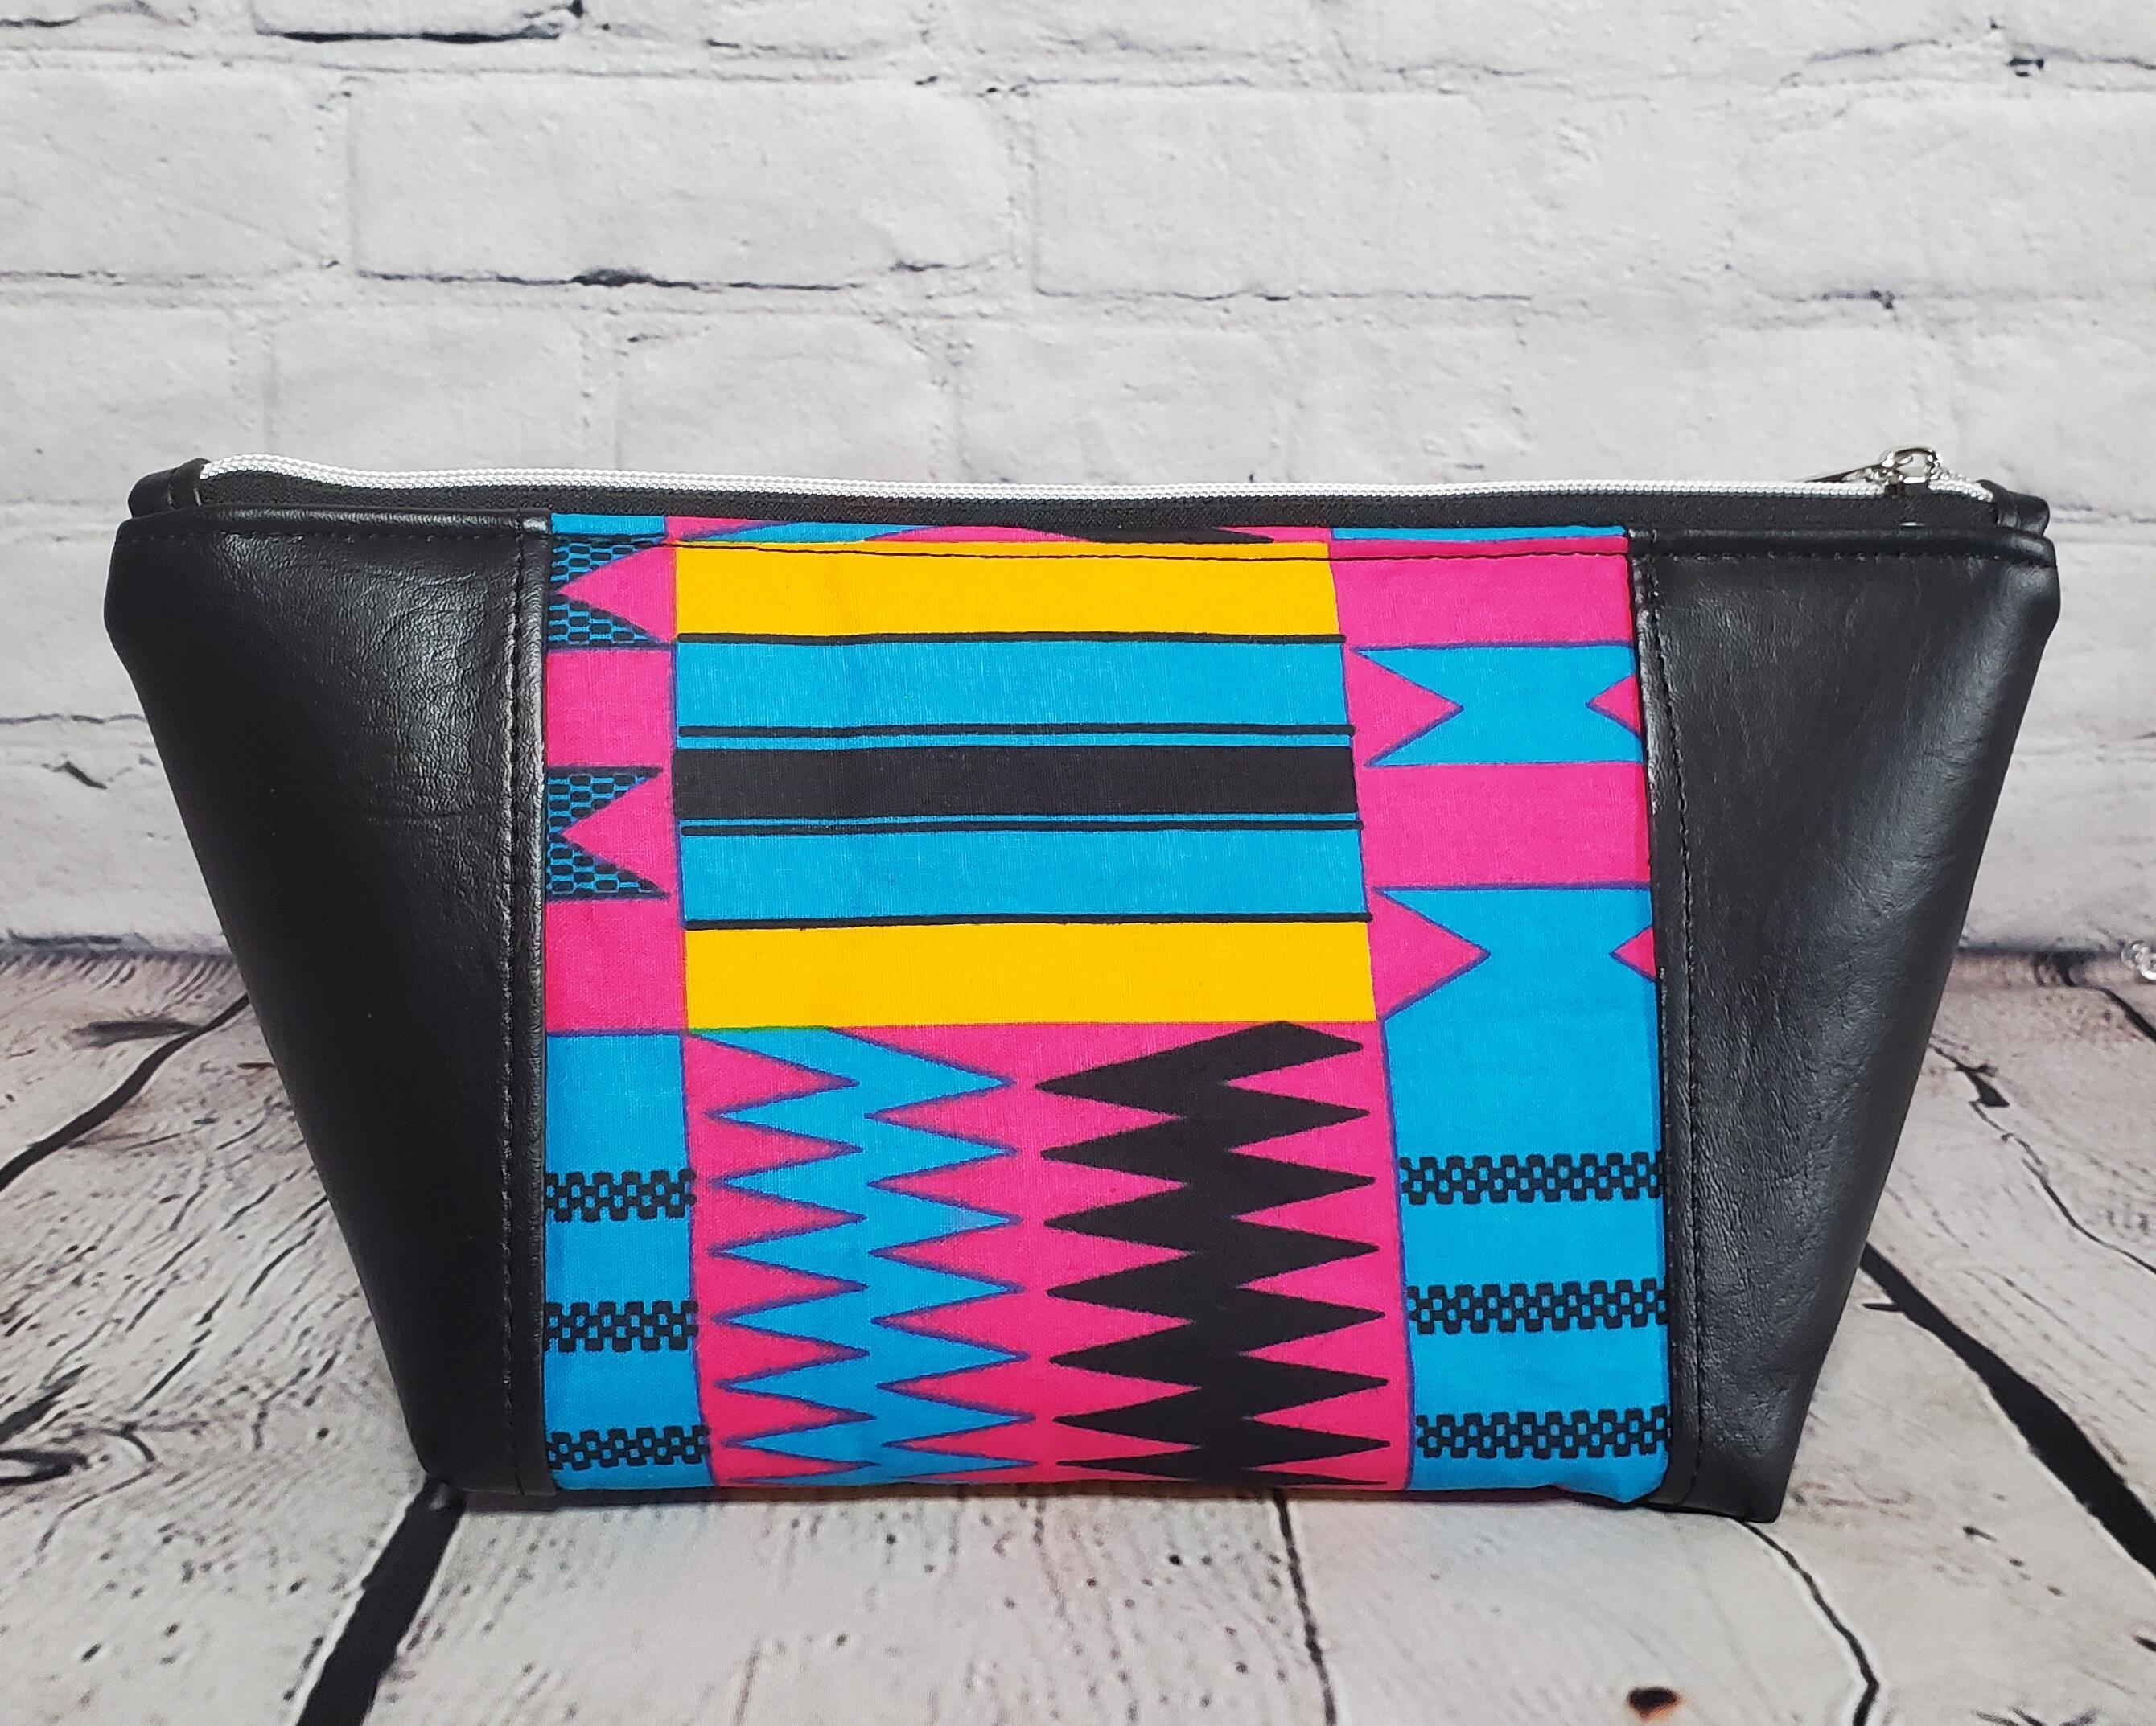 Pink blue and orange geometric print makeup bag with black faux leather accents, silver top zipper.